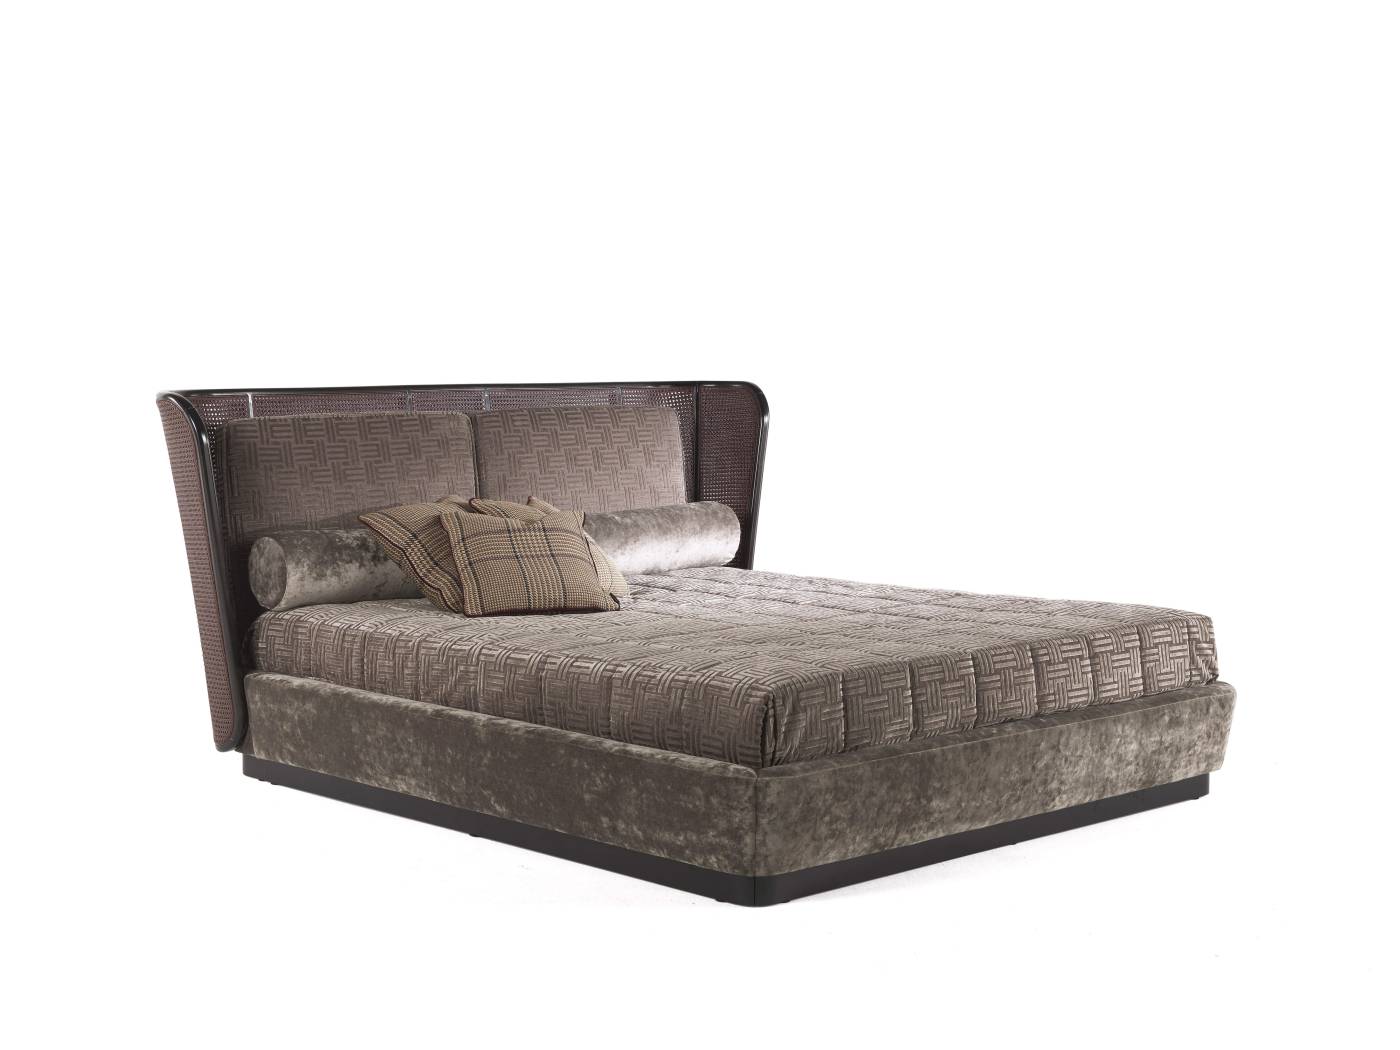 ETRO HOME INTERIORS_CARAL_bed_02.jpg